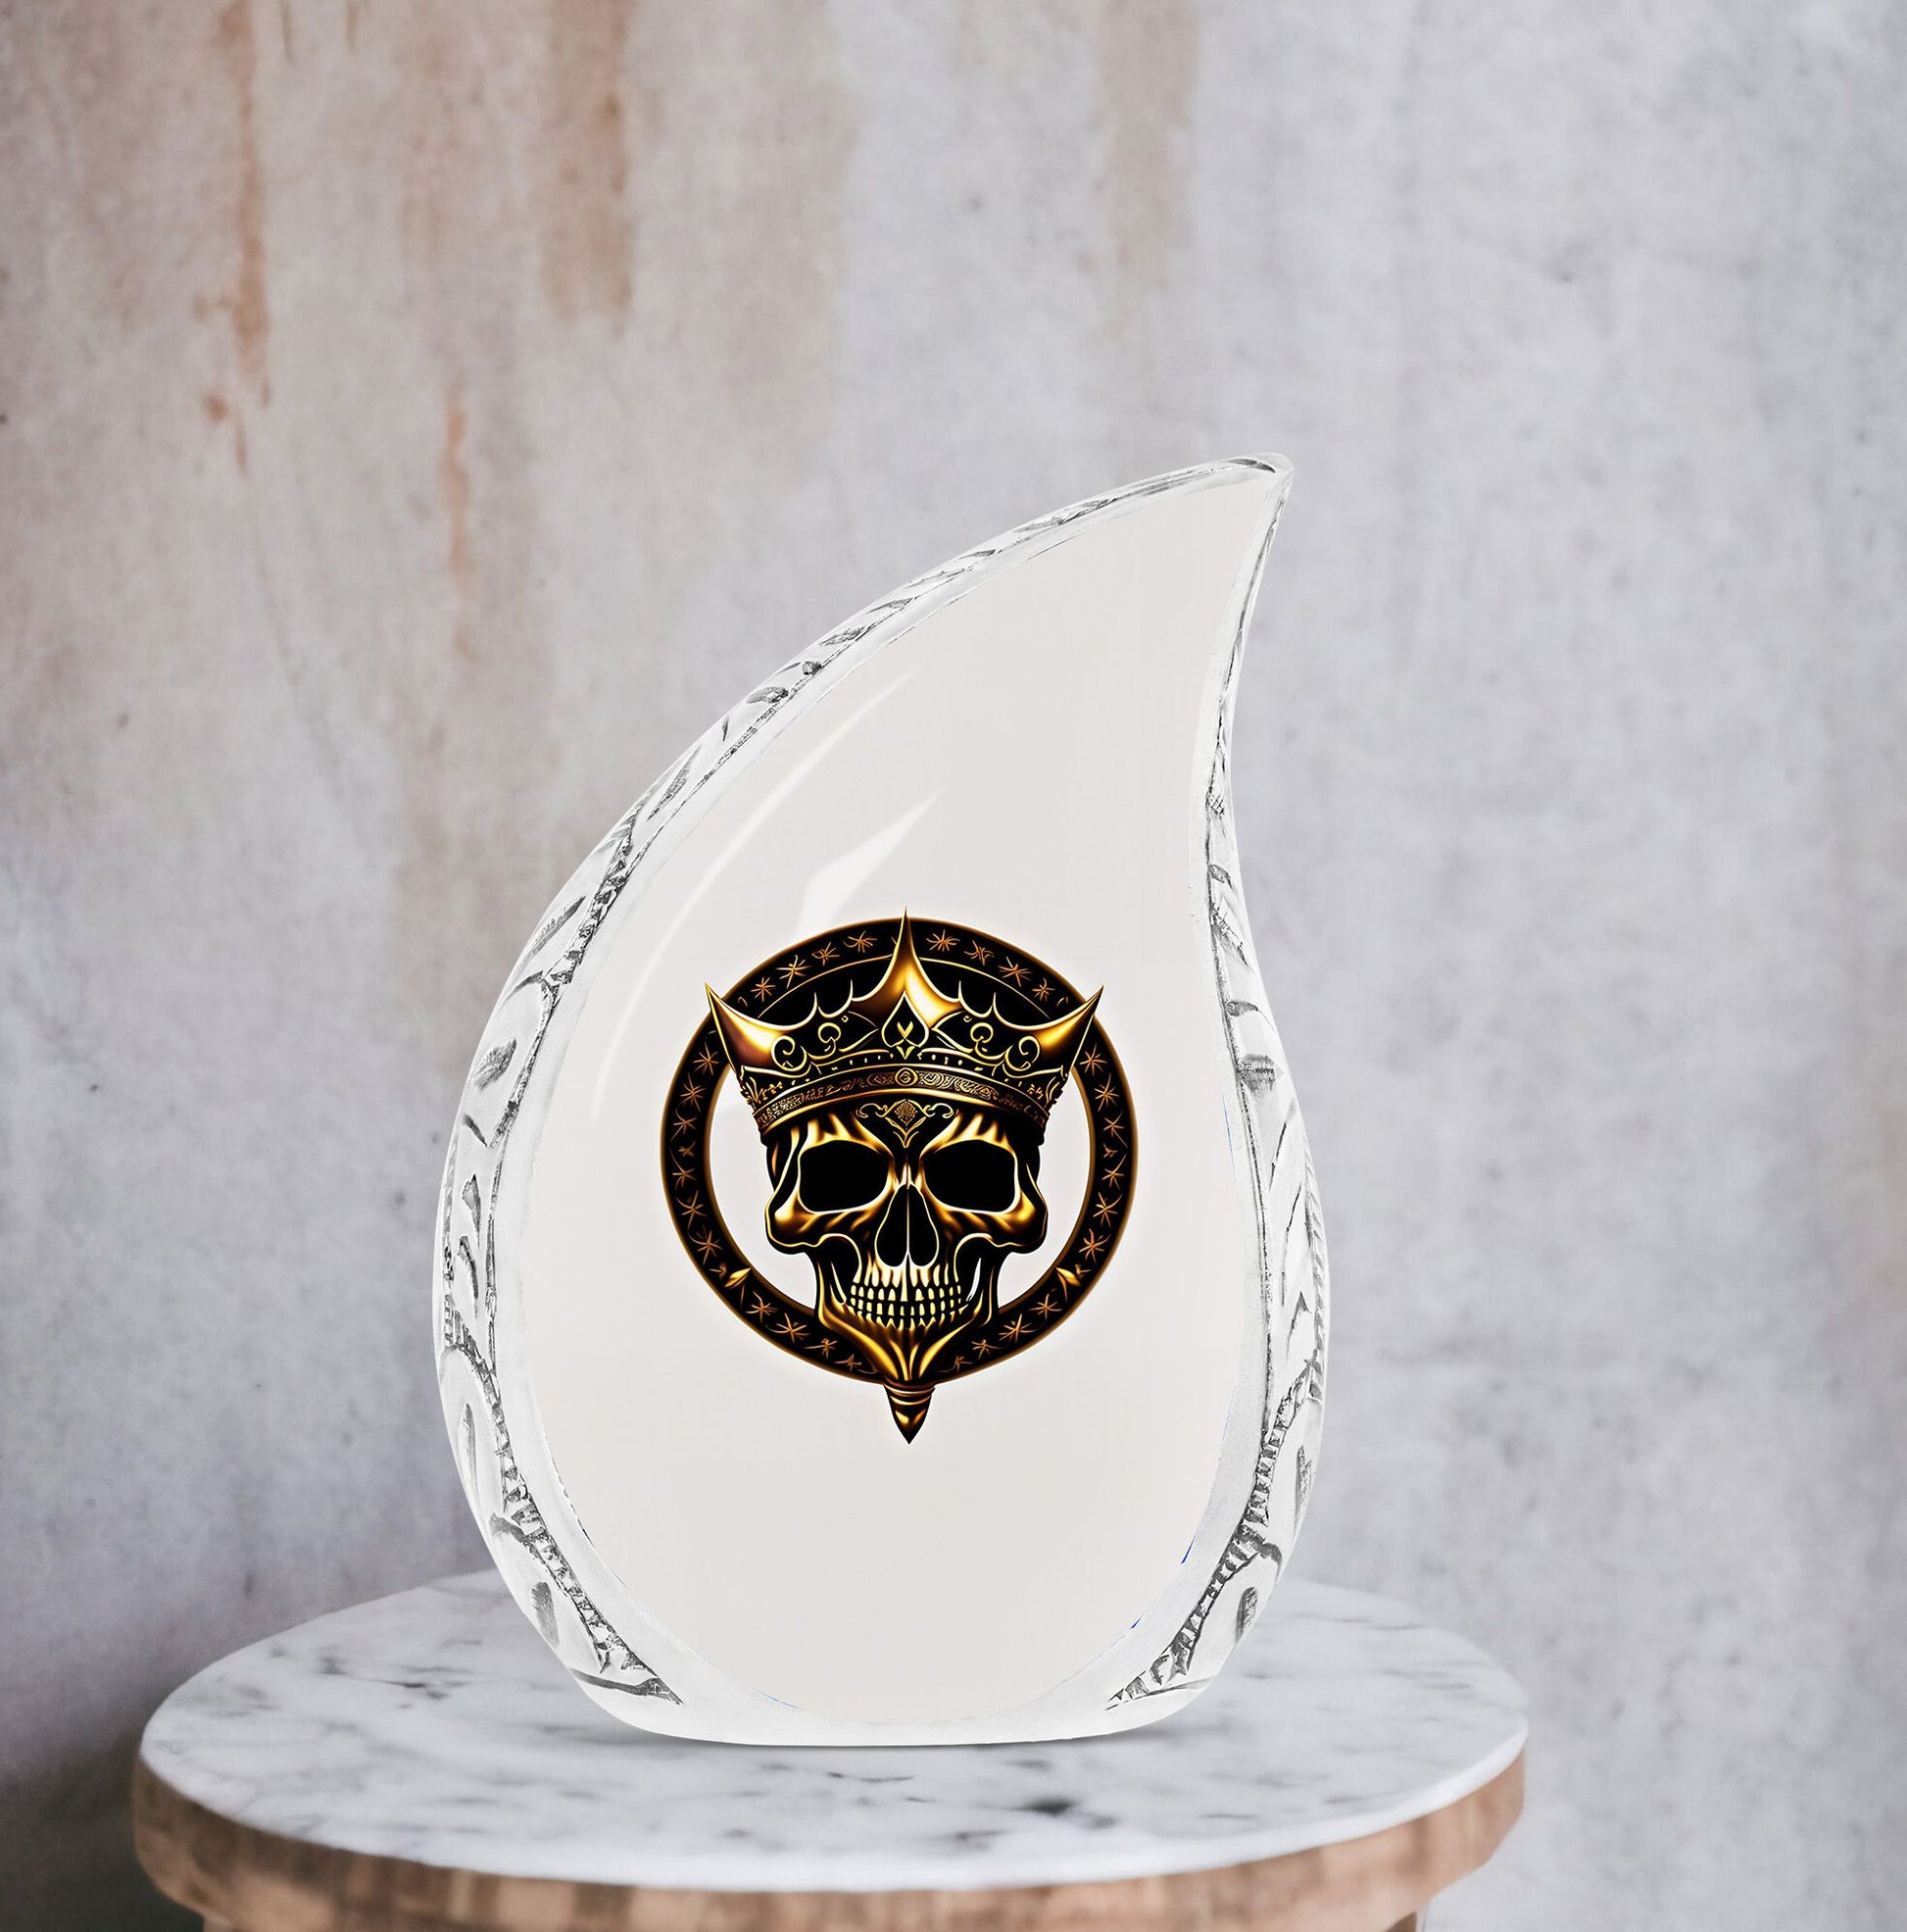 Large metal burial urn for adult ashes featuring a gold crown on a skull design, suitable for men